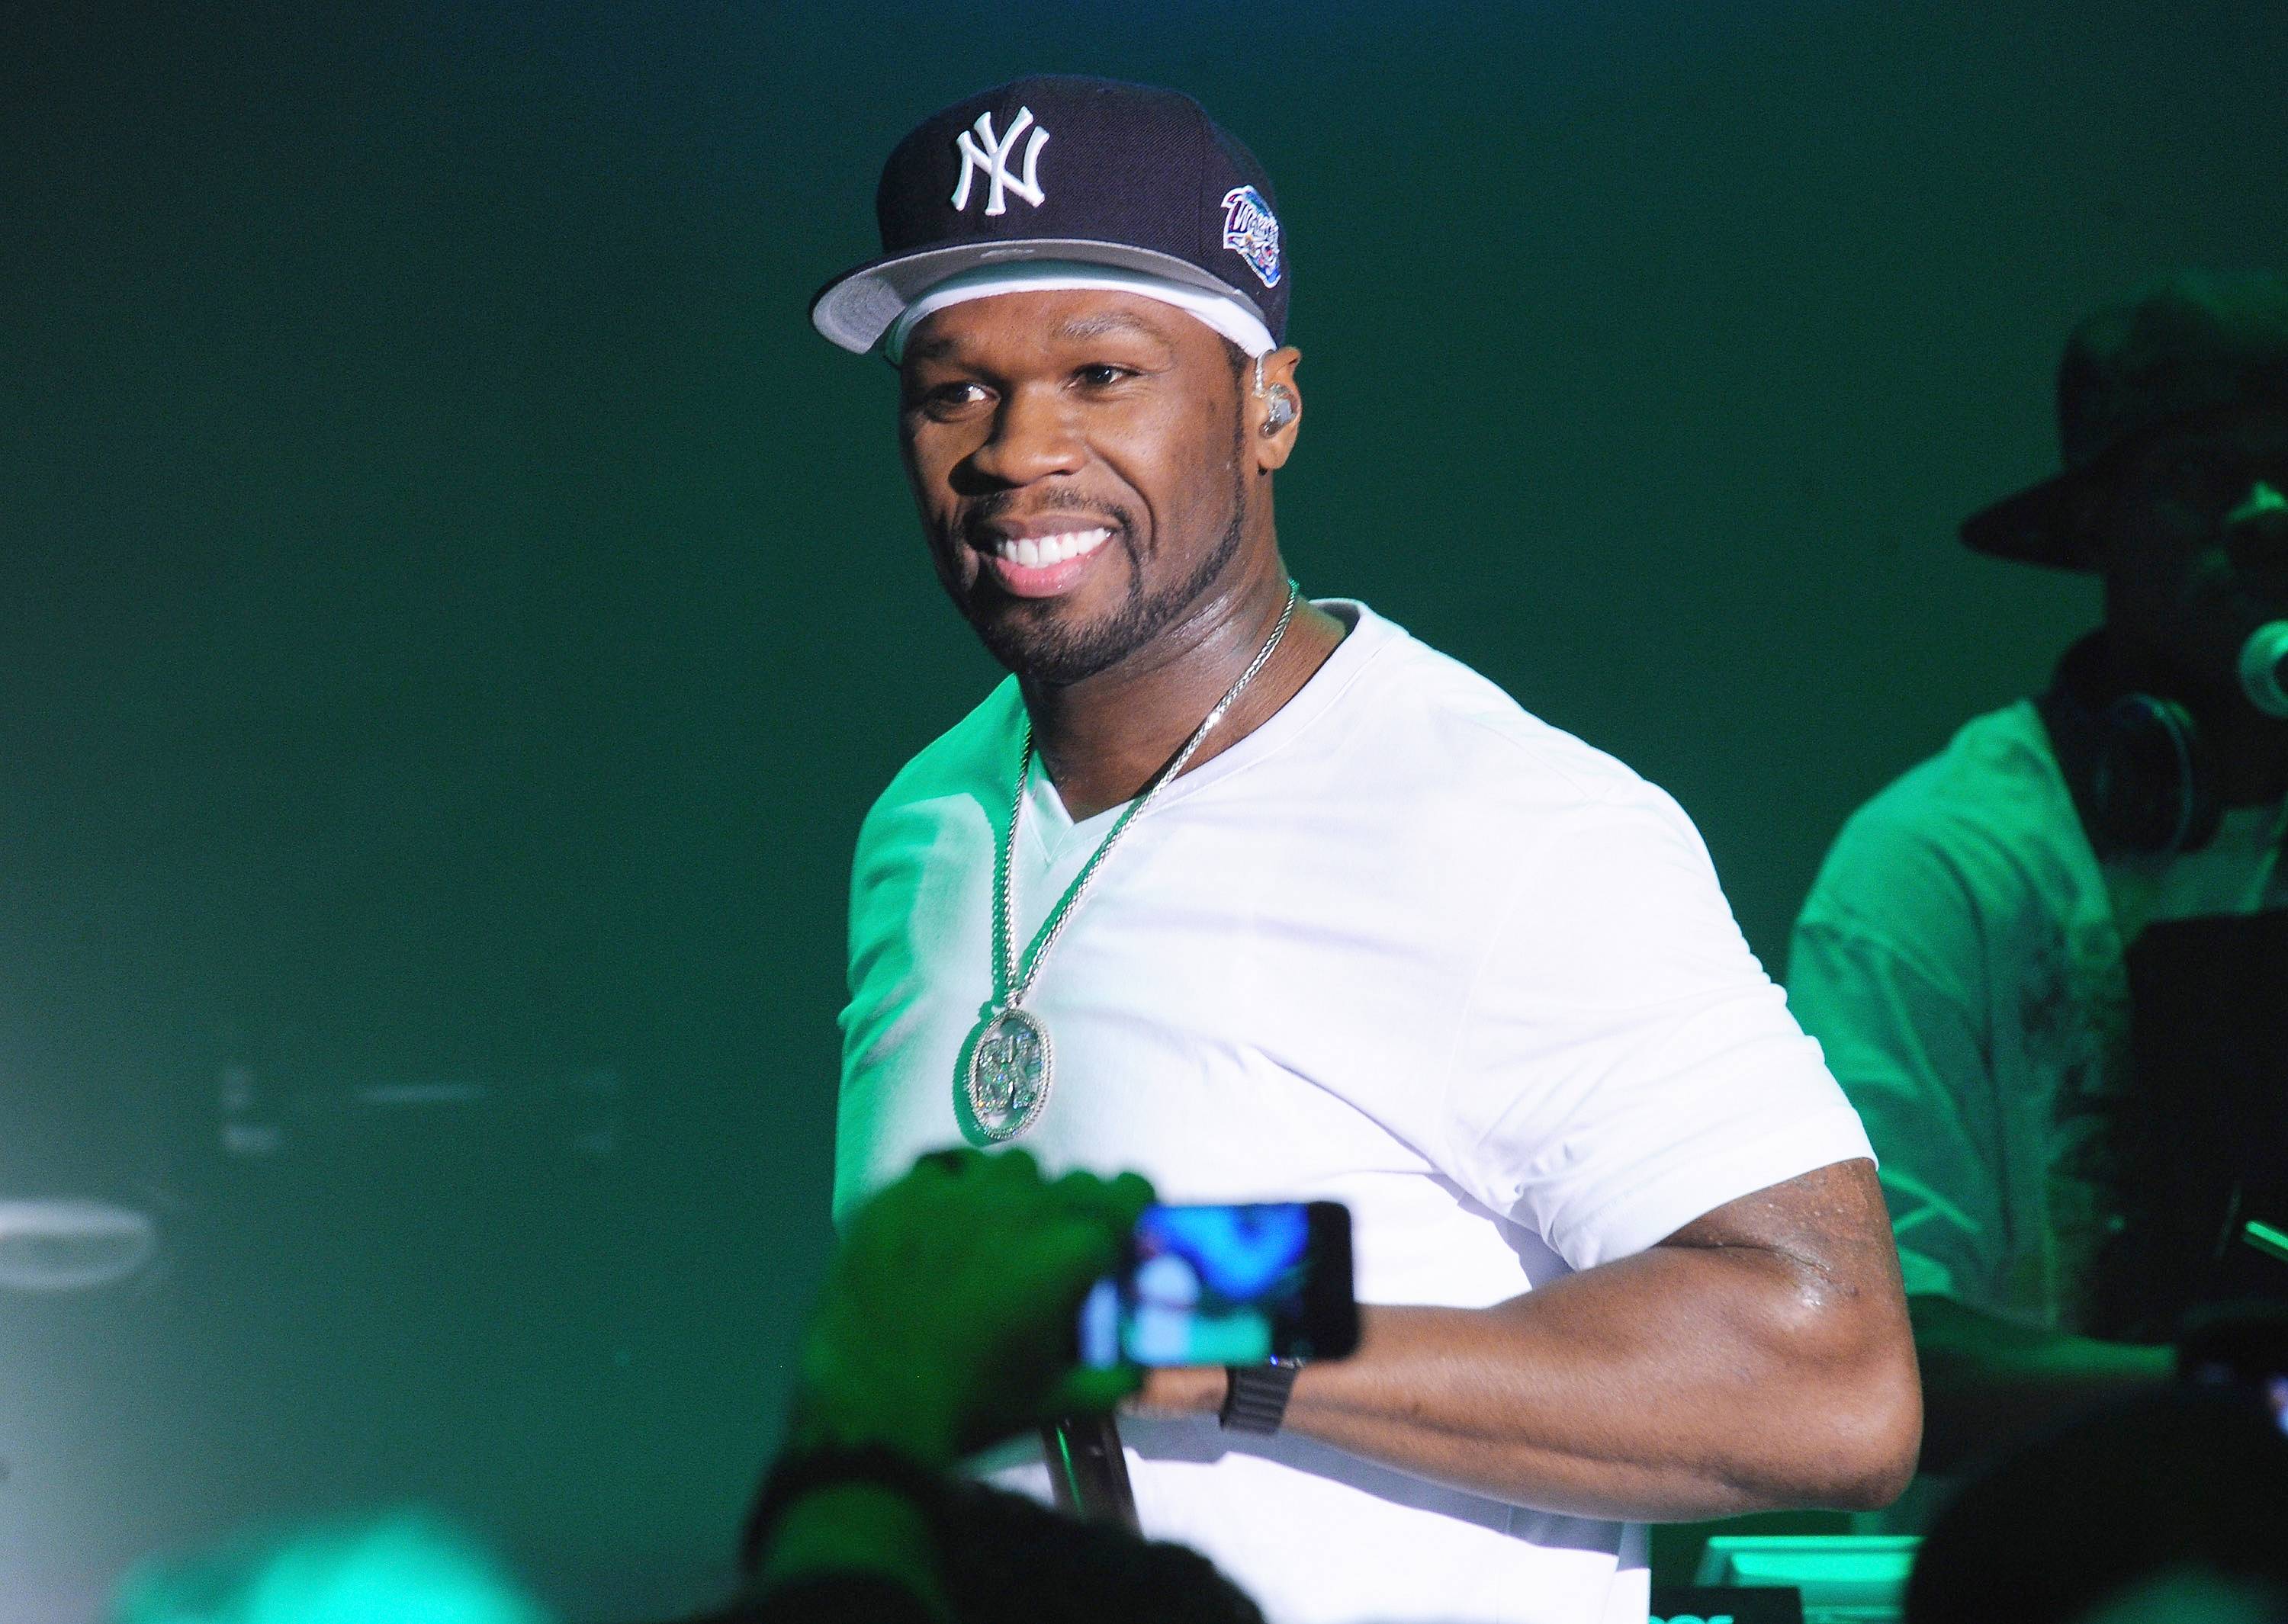 50 Cent - After his near-fatal 2000 shooting, 50 Cent was dropped from Columbia Records despite a completed album, Power of the Dollar, and an underground hit single, &quot;How to Rob.&quot; 50 picked up the pieces with a series of incredible mixtapes, which lead to a bidding war and a deal with Shady/Aftermath. We all know what happened next. (Photo: Jamie McCarthy/Getty Images for Motorola)